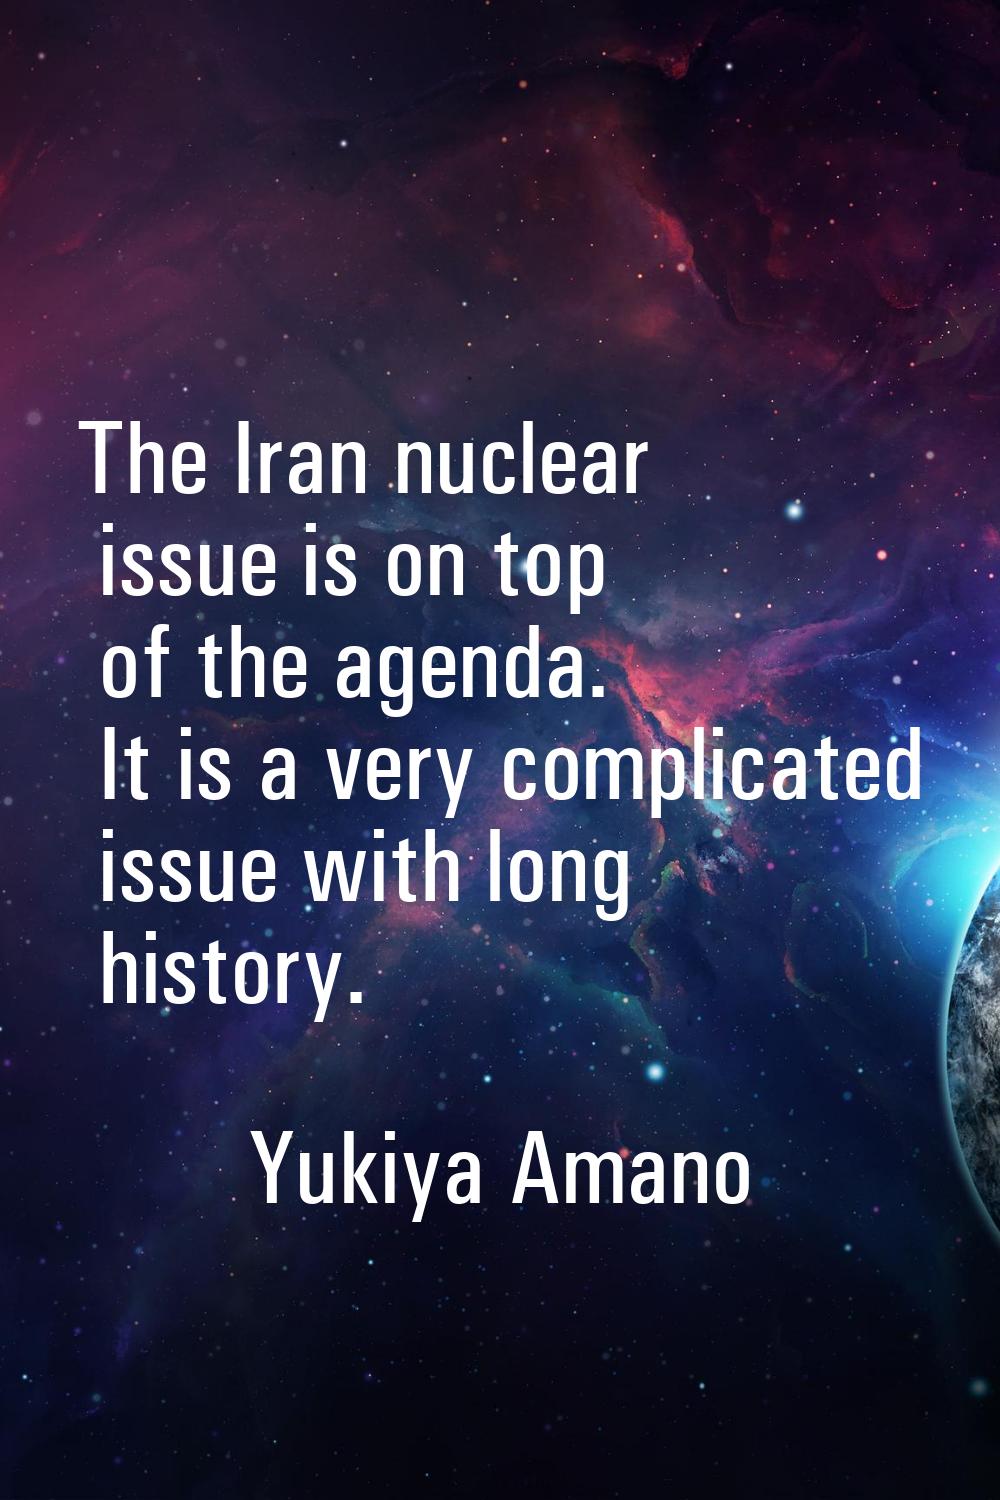 The Iran nuclear issue is on top of the agenda. It is a very complicated issue with long history.